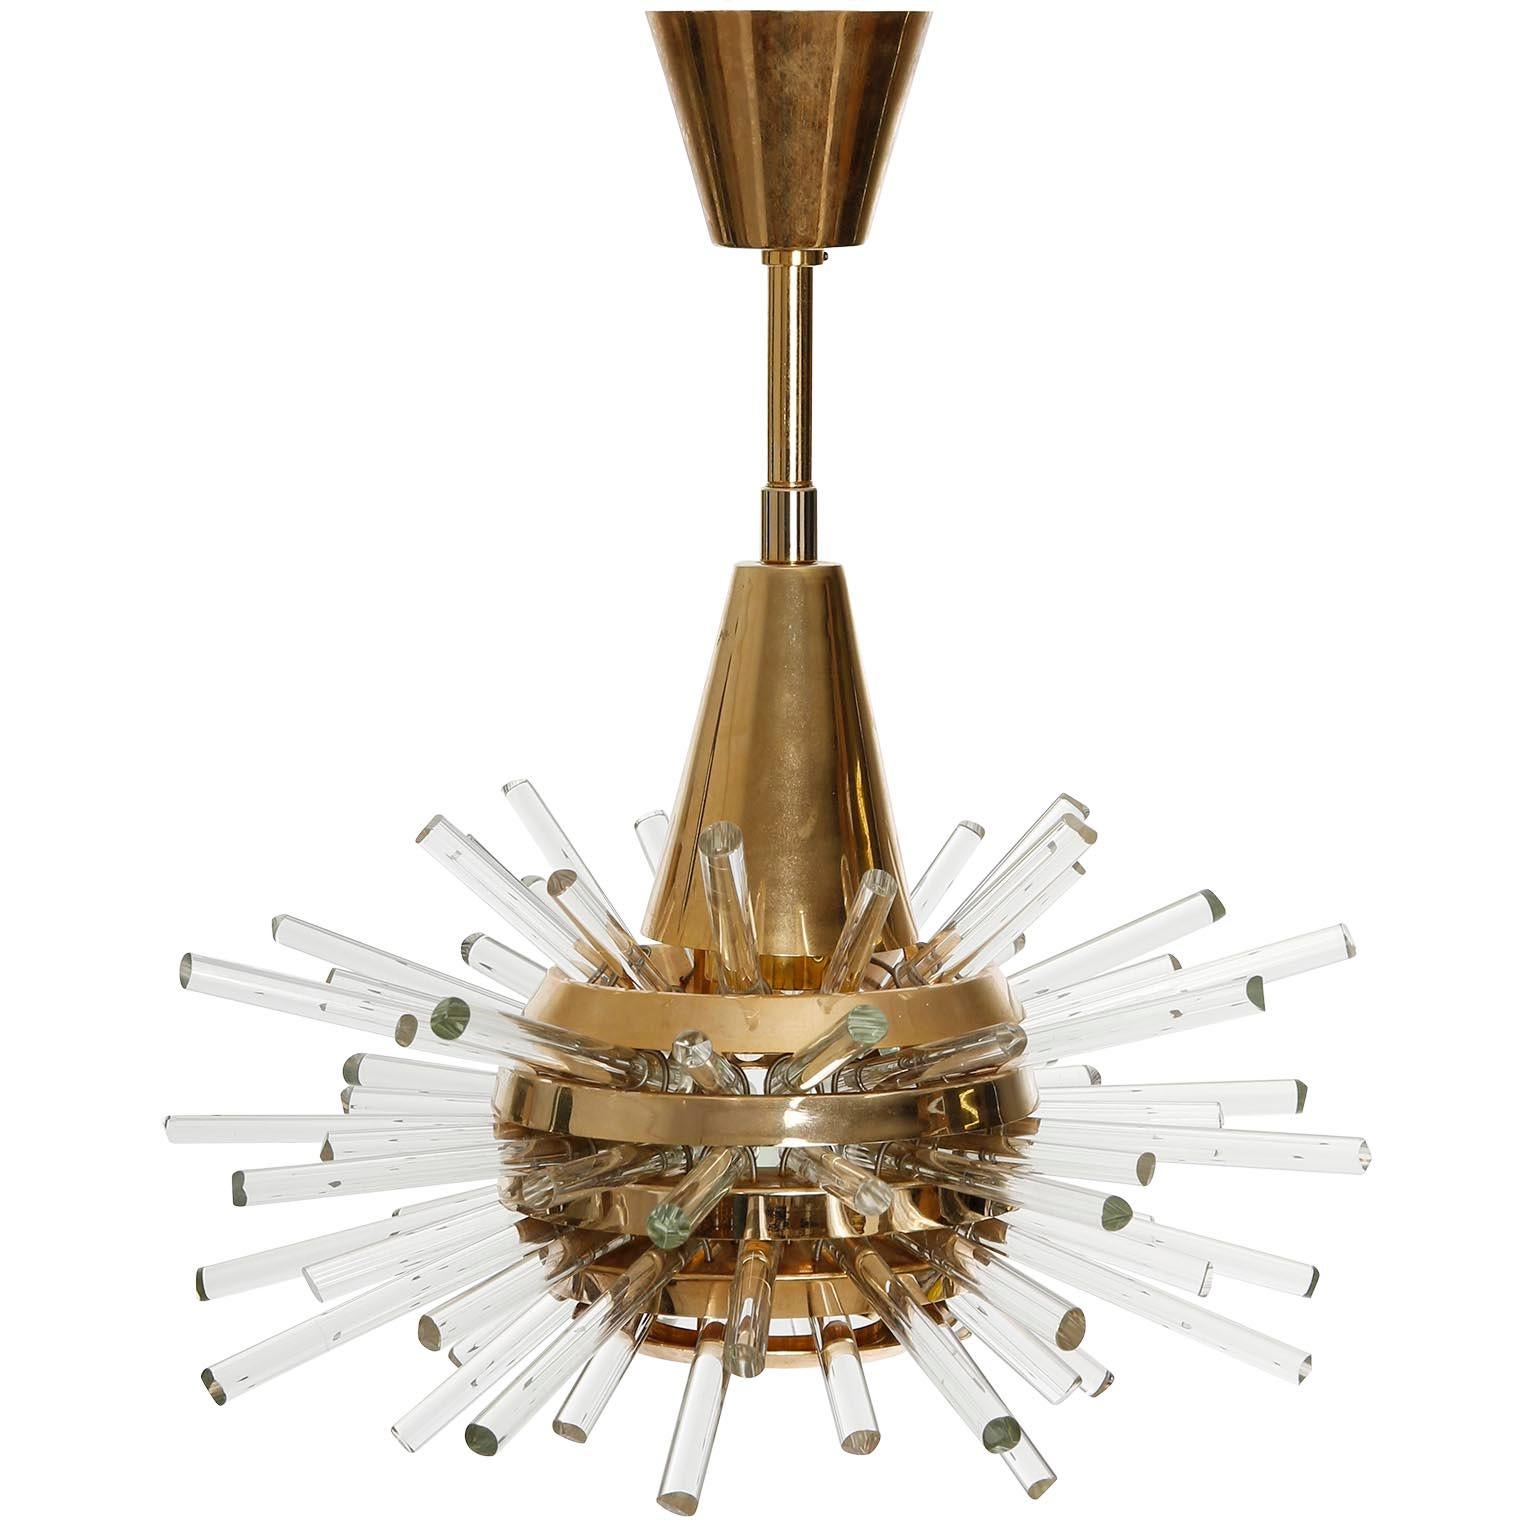 A fantastic sputnik chandelier or pendant light by Bakalowits & Sohne, Austria, manufactured in midcentury, circa 1970 (late 1960s or early 1970s).
A layered multi-tier structure made of gilt solid brass rings and glass rods with faceted ends in